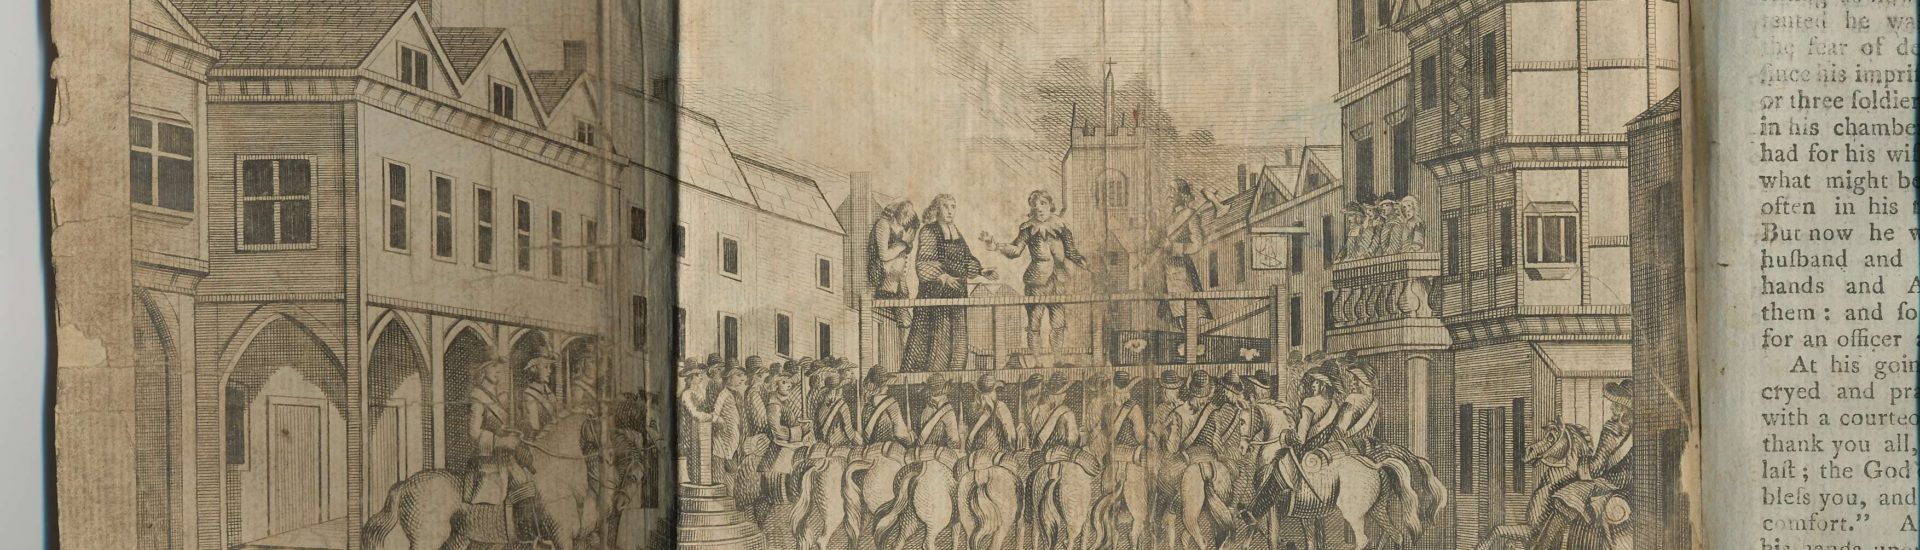 Black and white depiction of execution of the earl of Derby